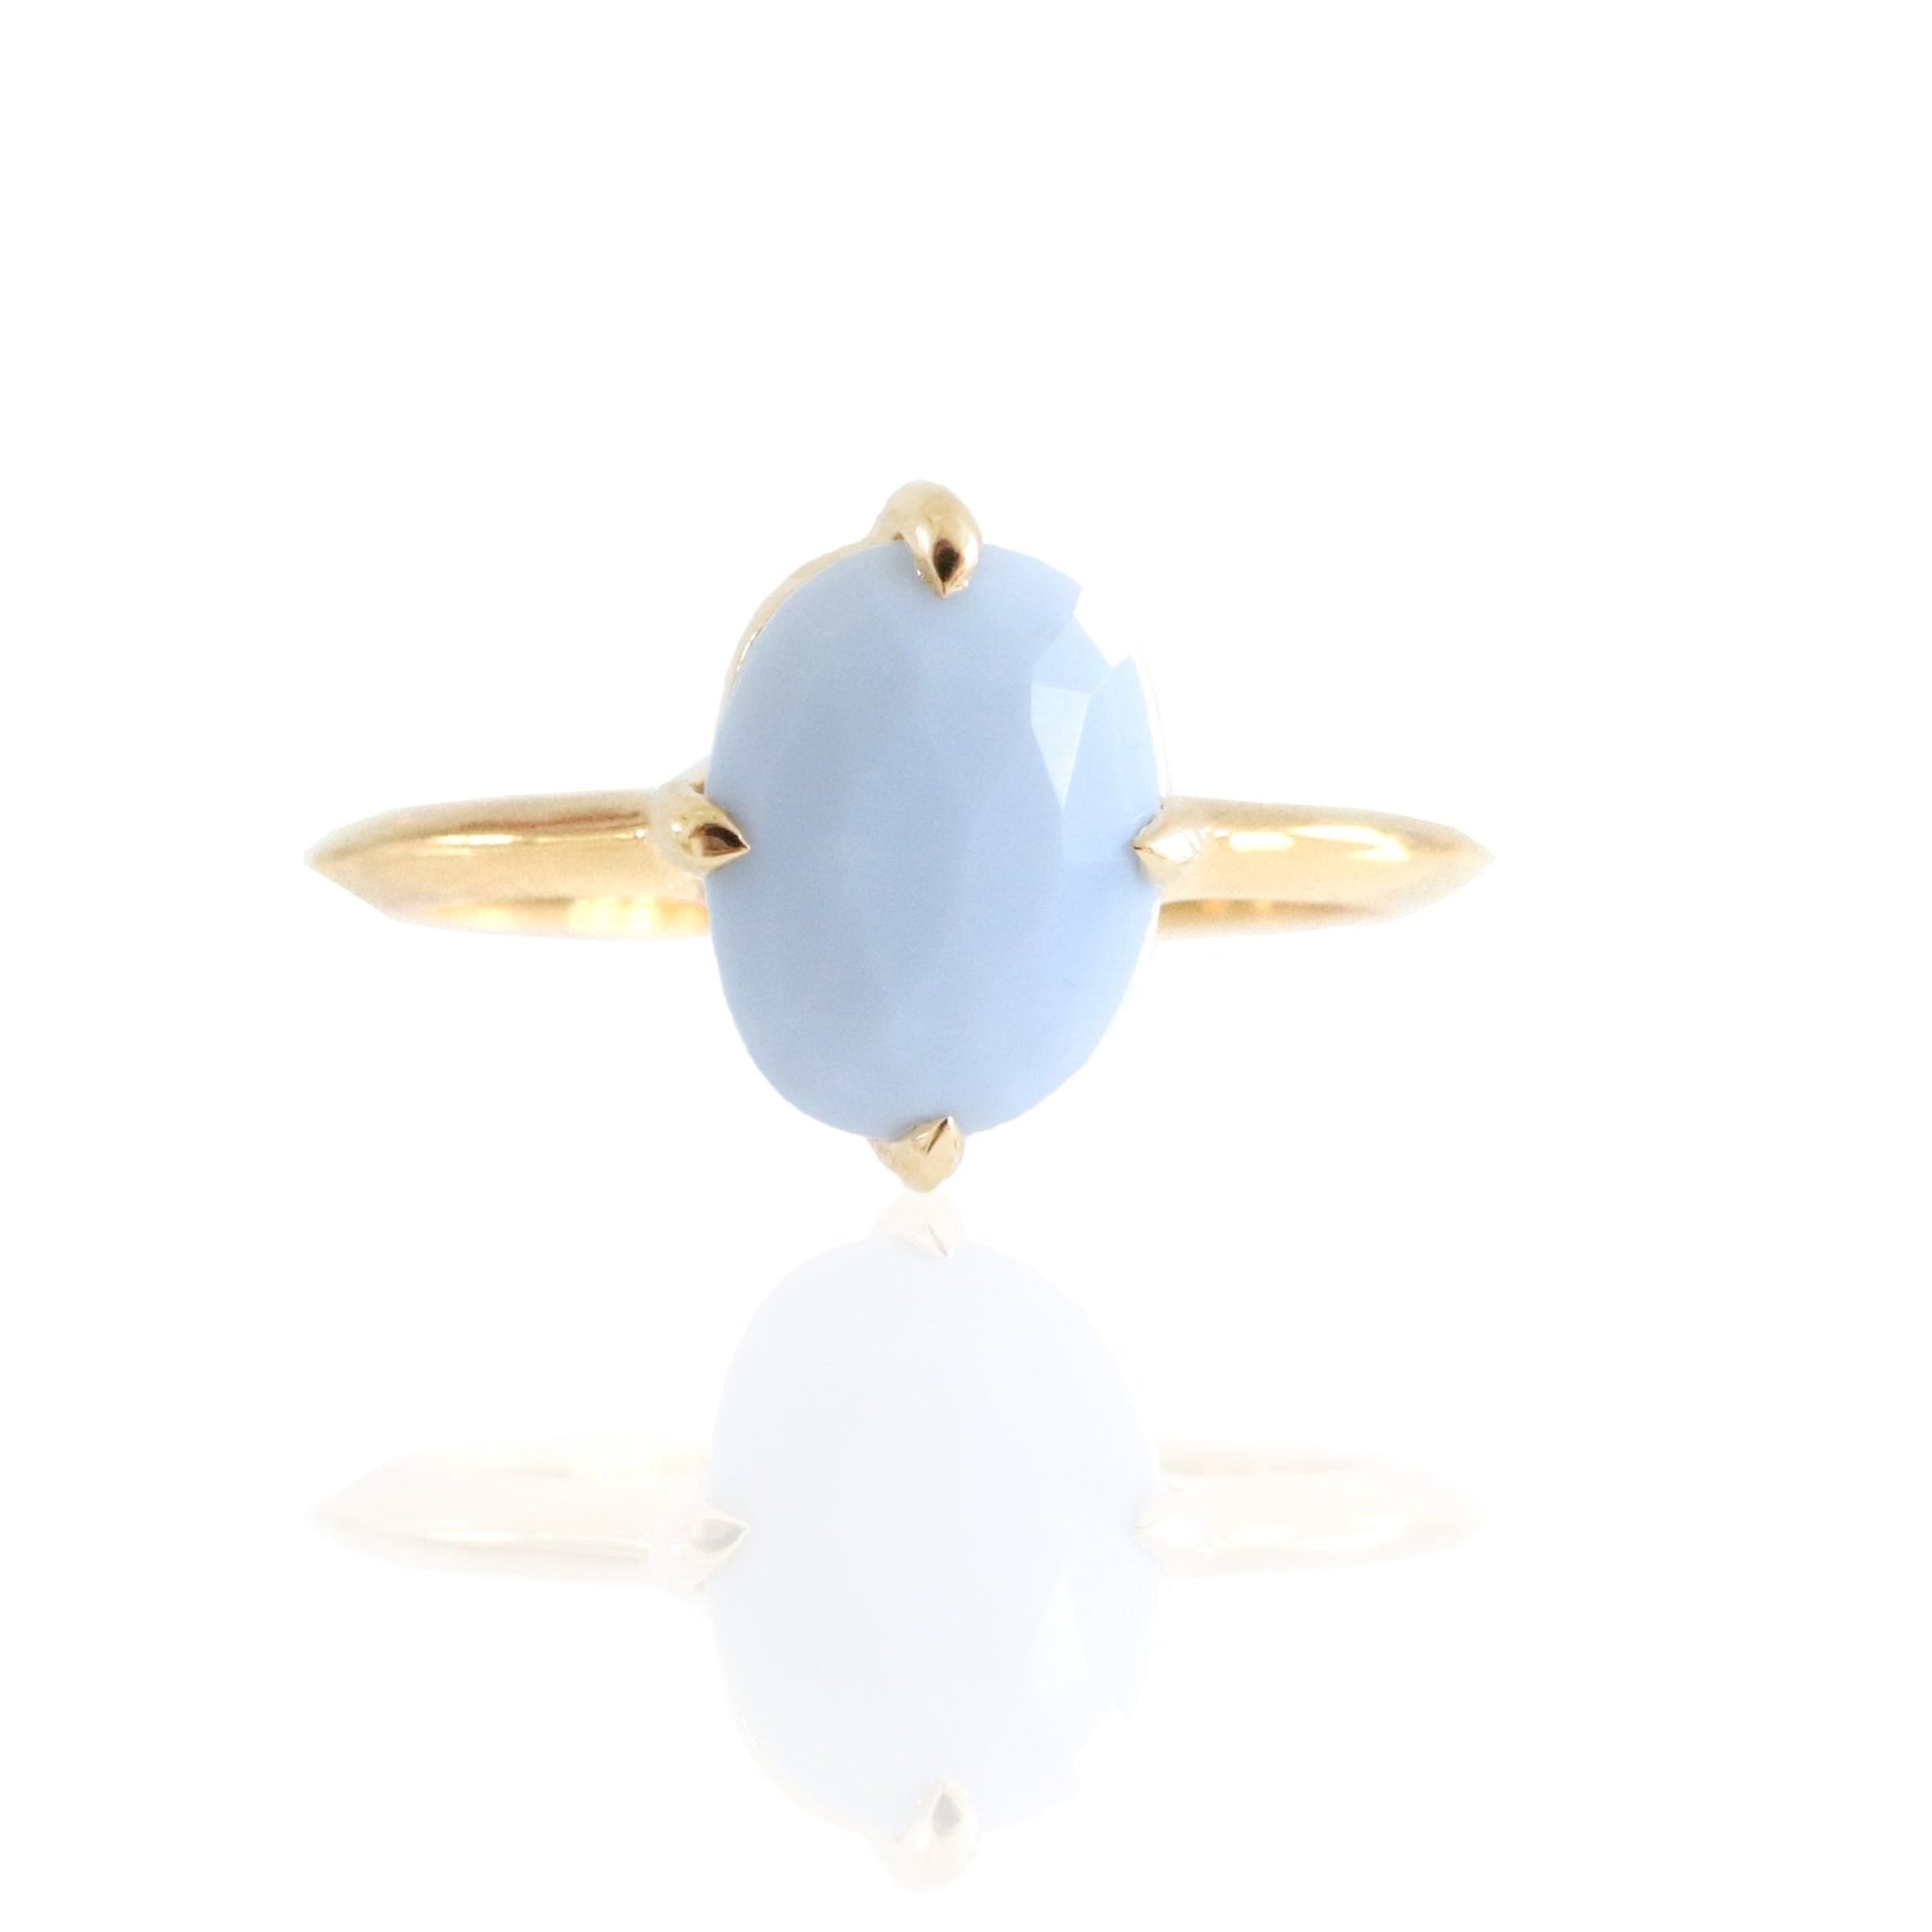 FRAICHE INSPIRE OVAL SOLITAIRE RING - BLUE OPAL & GOLD - SO PRETTY CARA COTTER